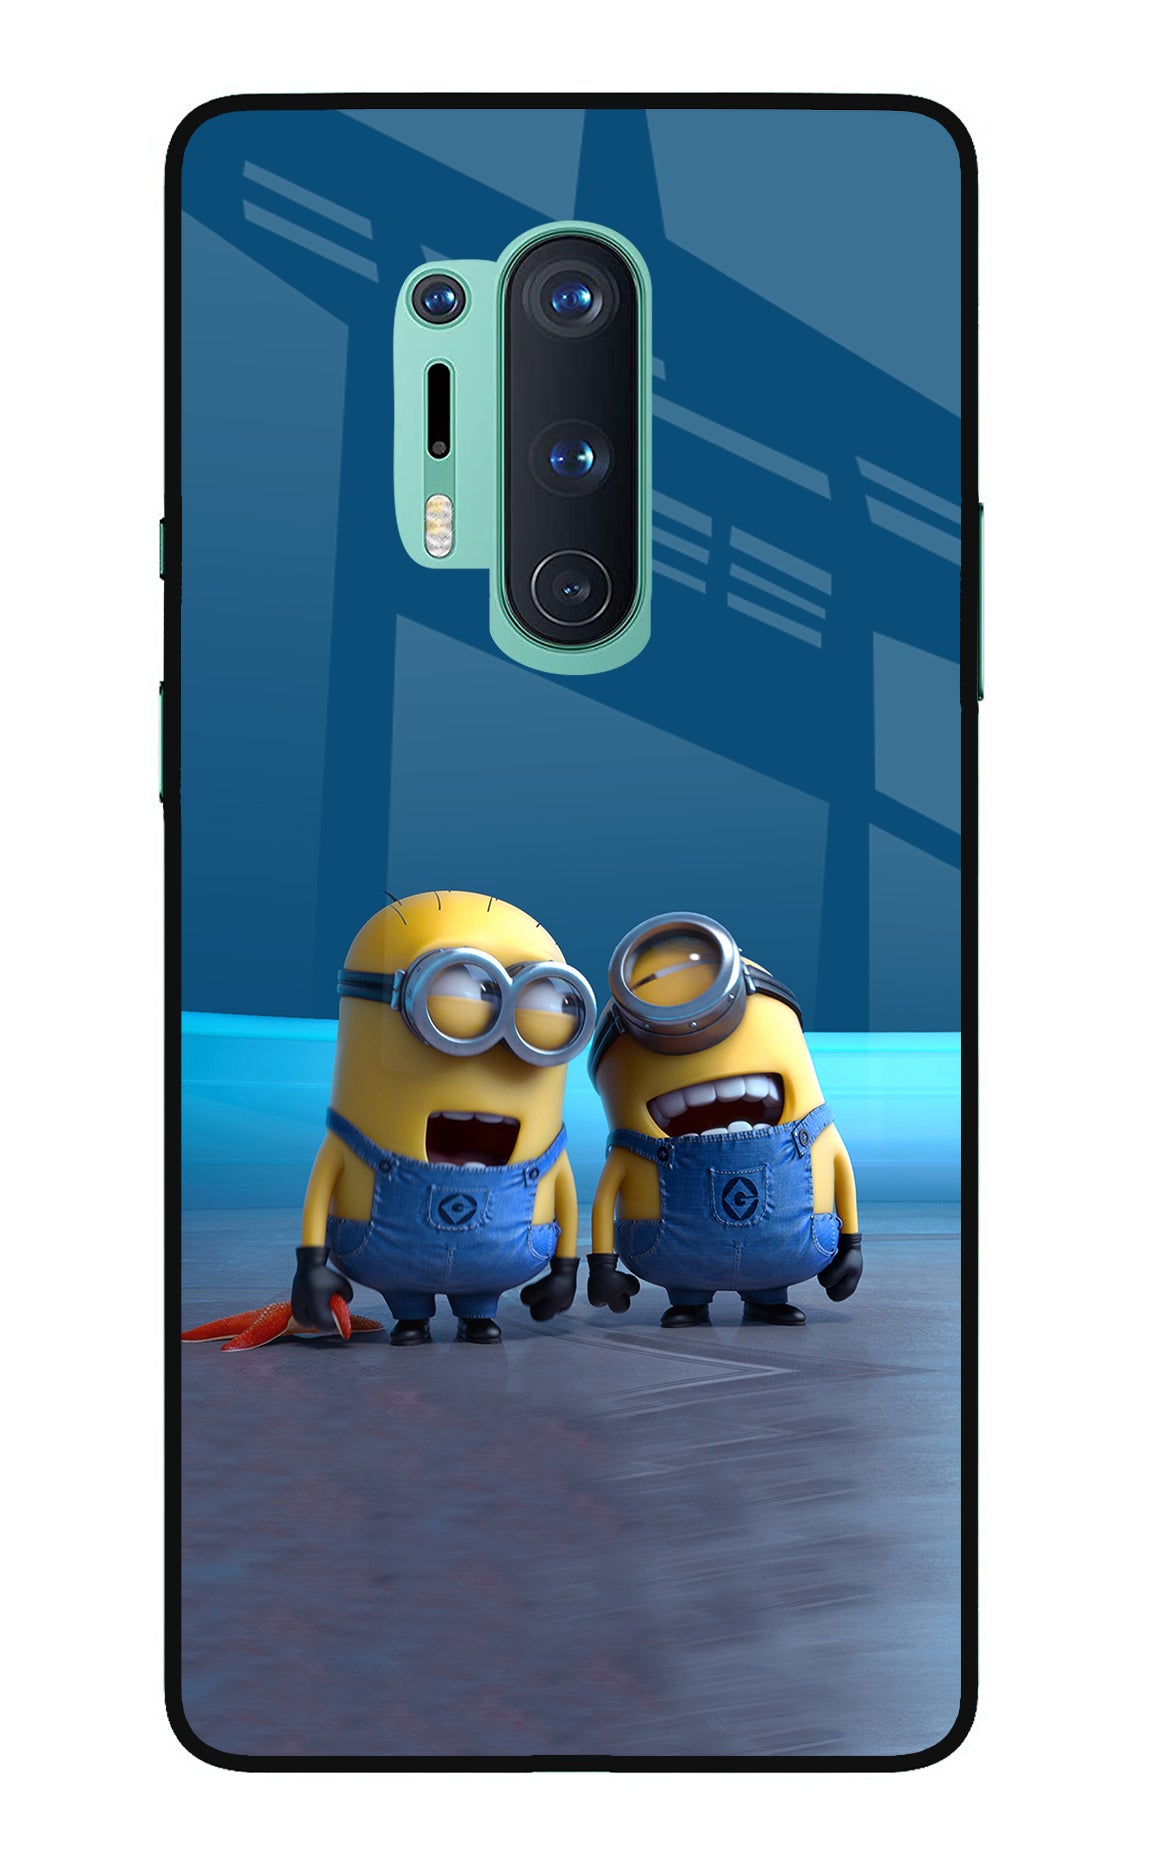 Minion Laughing Oneplus 8 Pro Back Cover